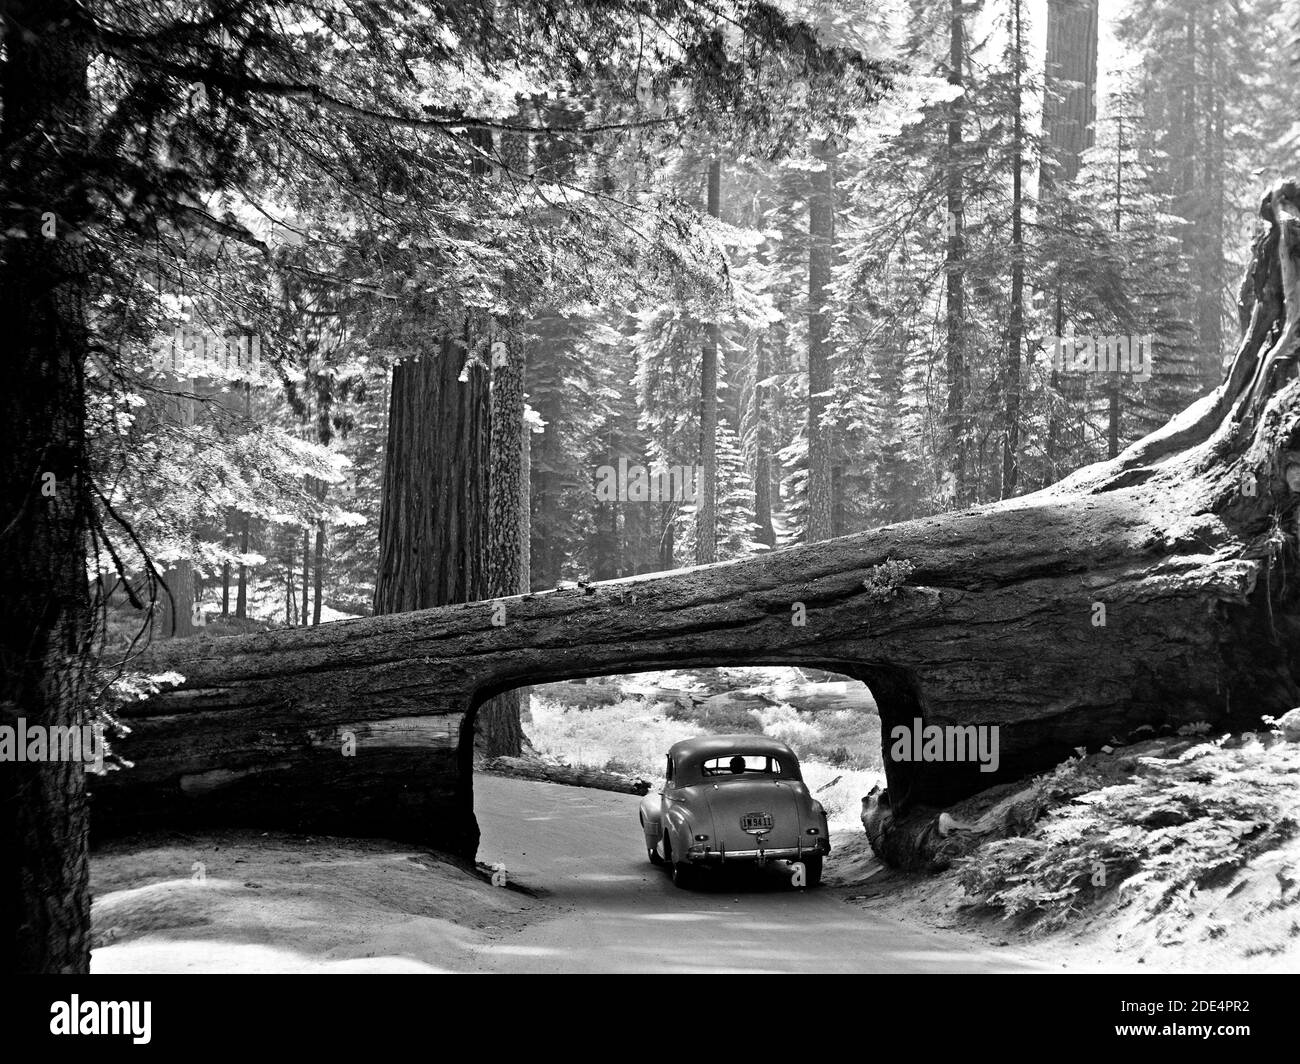 California History - Sequoia National Park Sept. 1957. The tunnel log. Car driving through passage way cut through side of log ca. 1957 Stock Photo